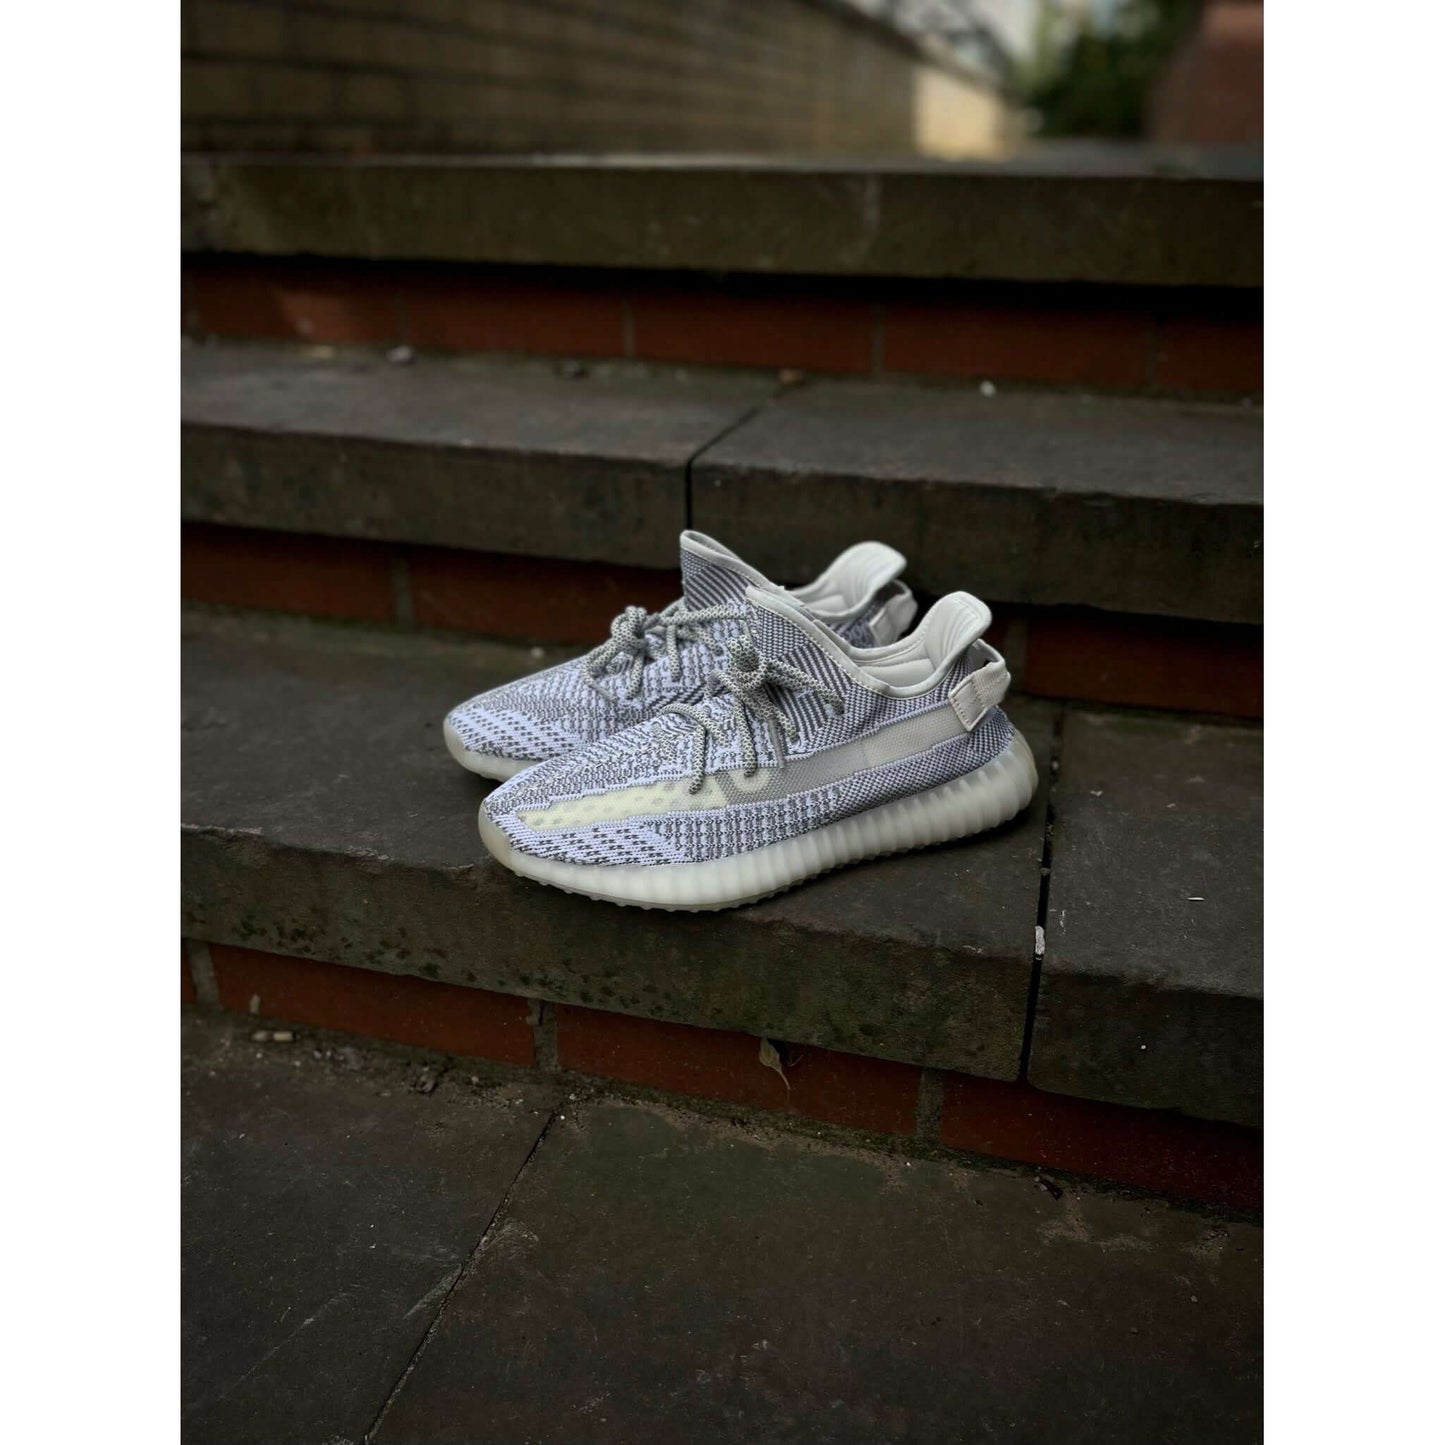 Adidas Yeezy Boost 350 V2 Static by Yeezy from £255.00